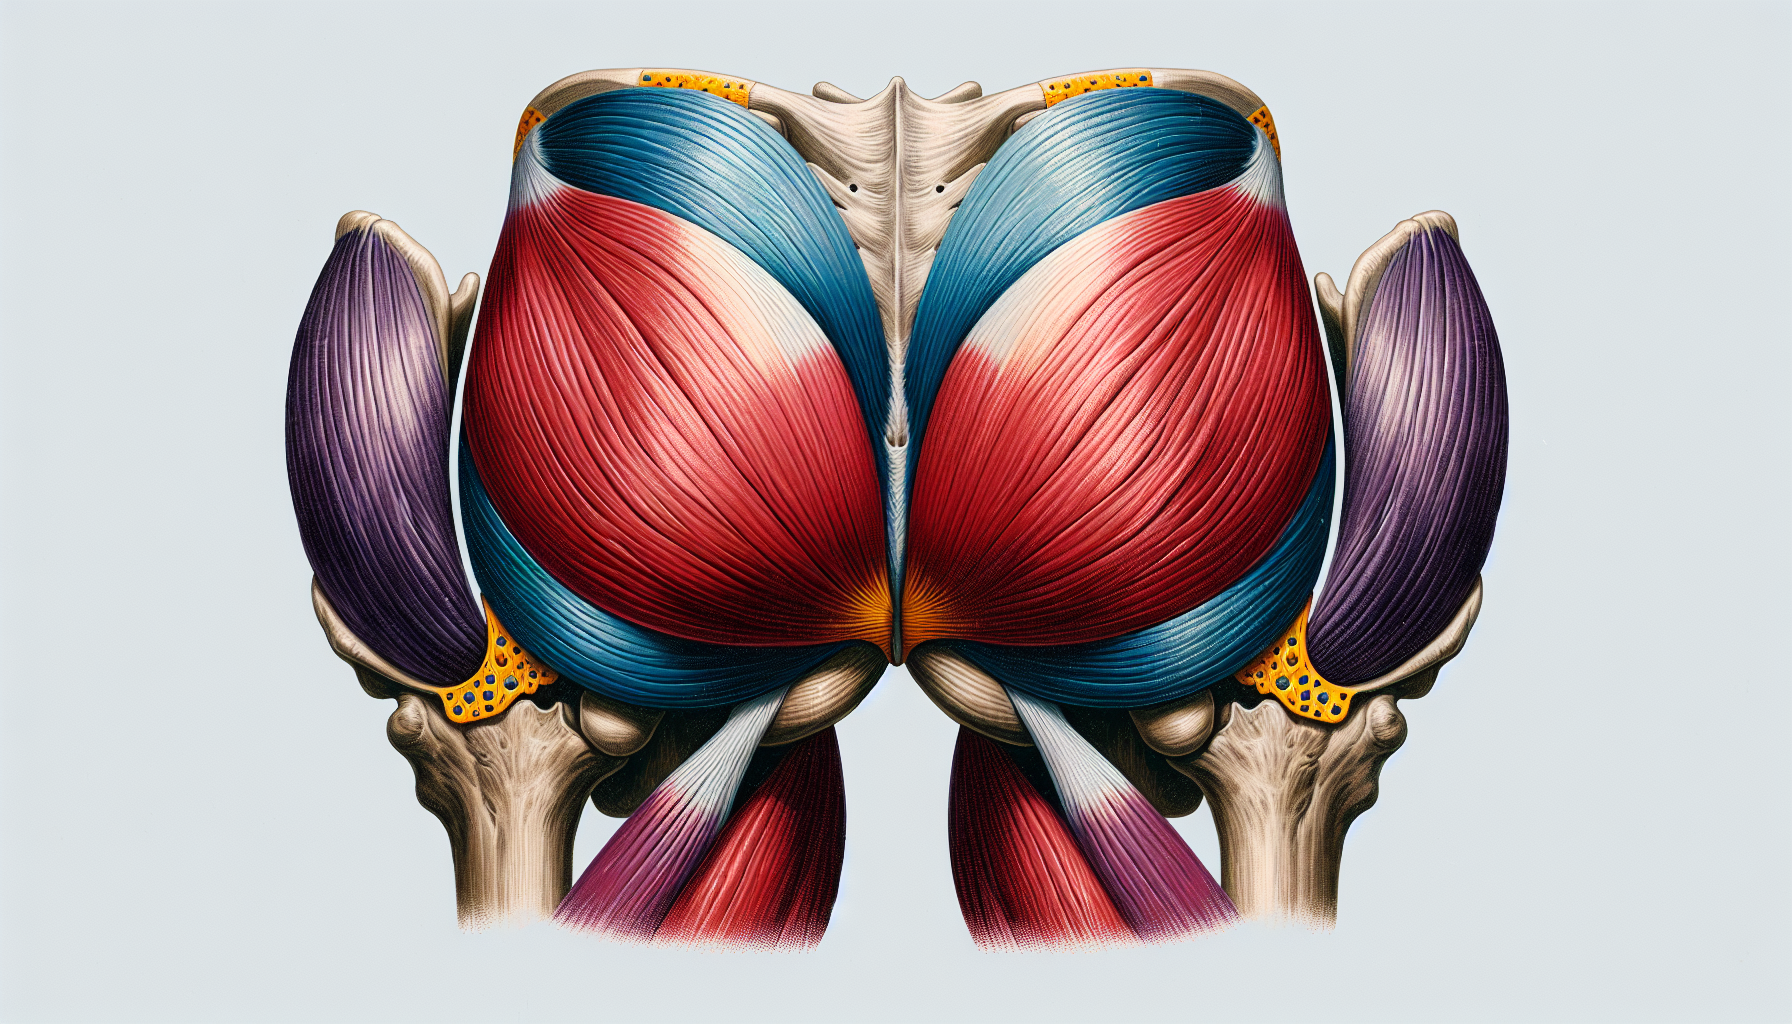 Illustration of glute muscles